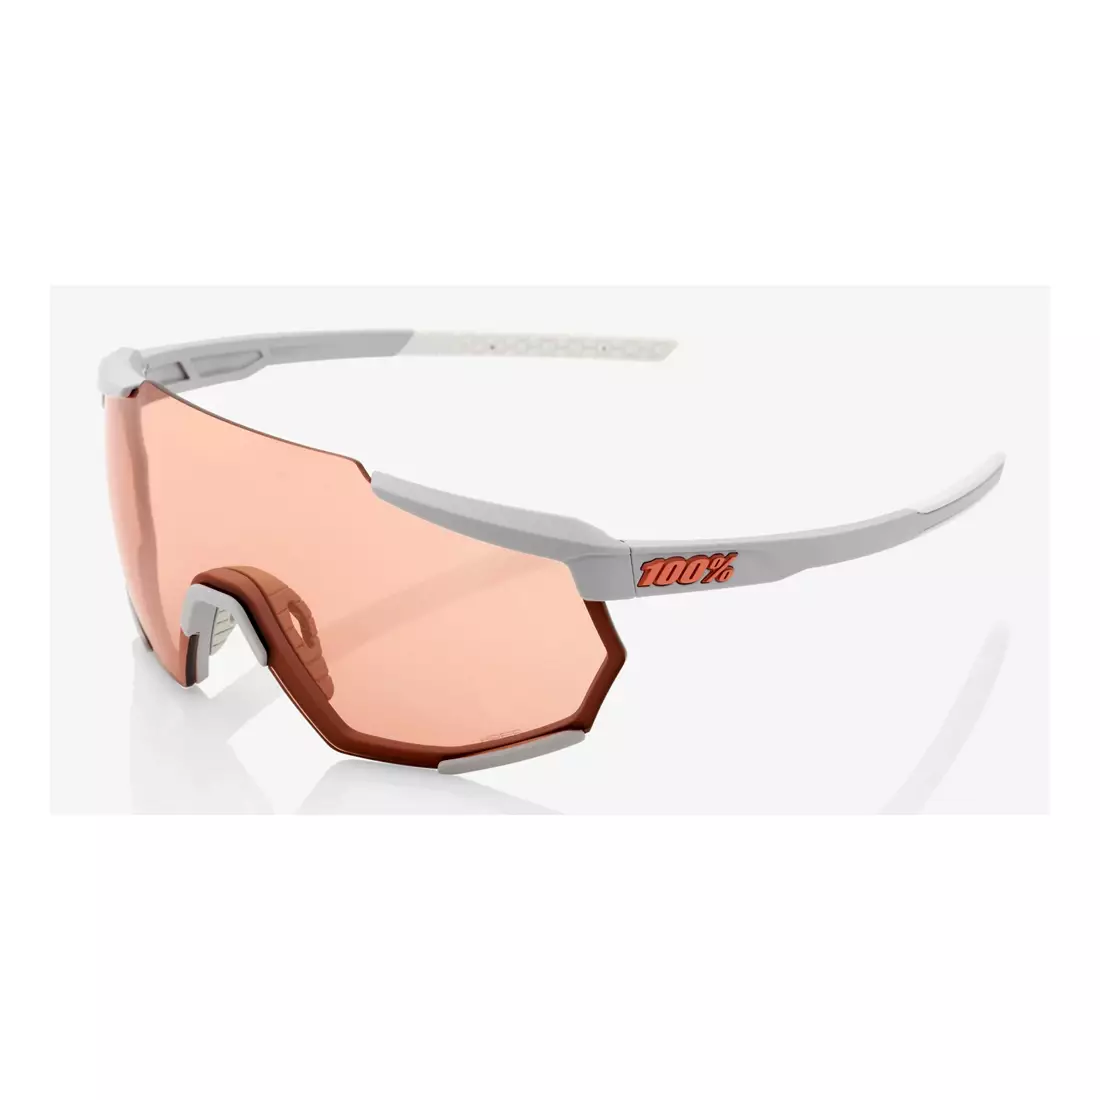 100% sports glasses RACETRAP (coral glasses, LT 52% + clear glasses, LT 93%) soft tact stone grey STO-61037-289-79